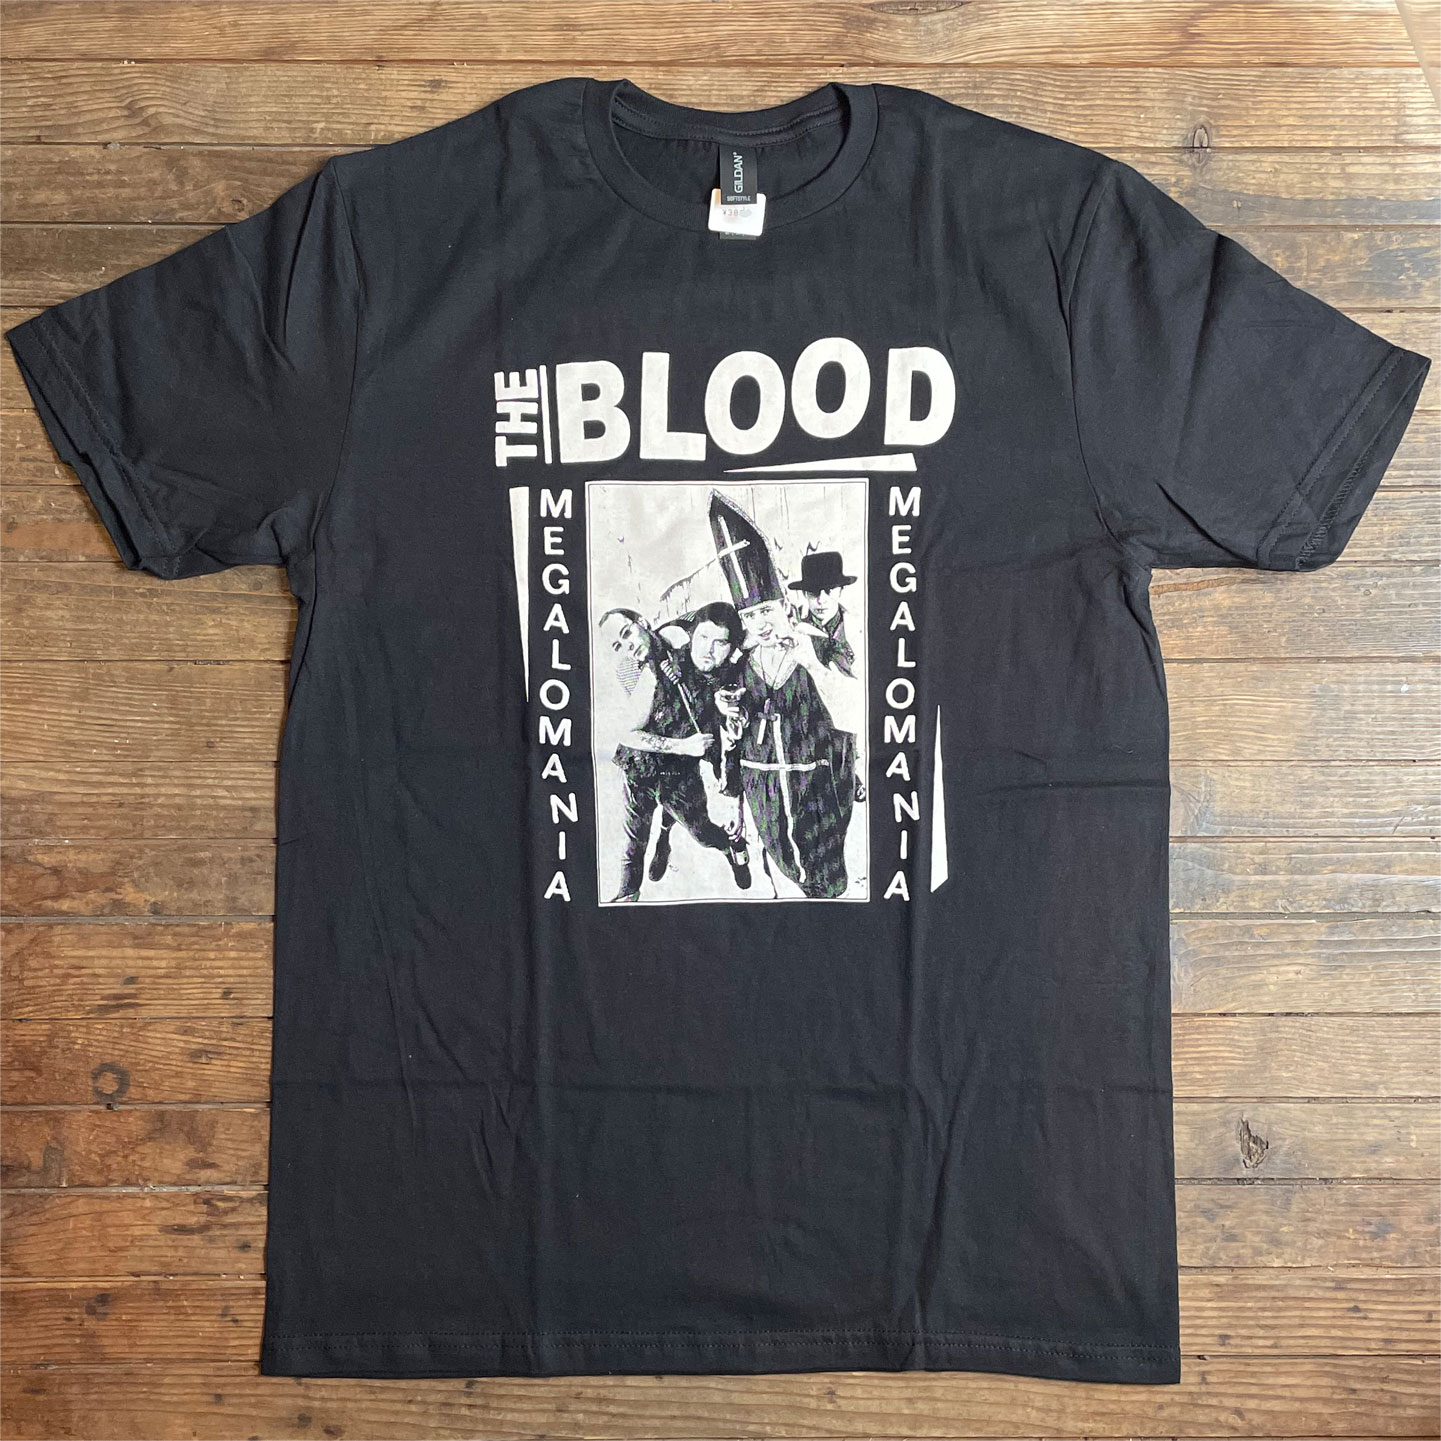 THE BLOOD Tシャツ megalomania2